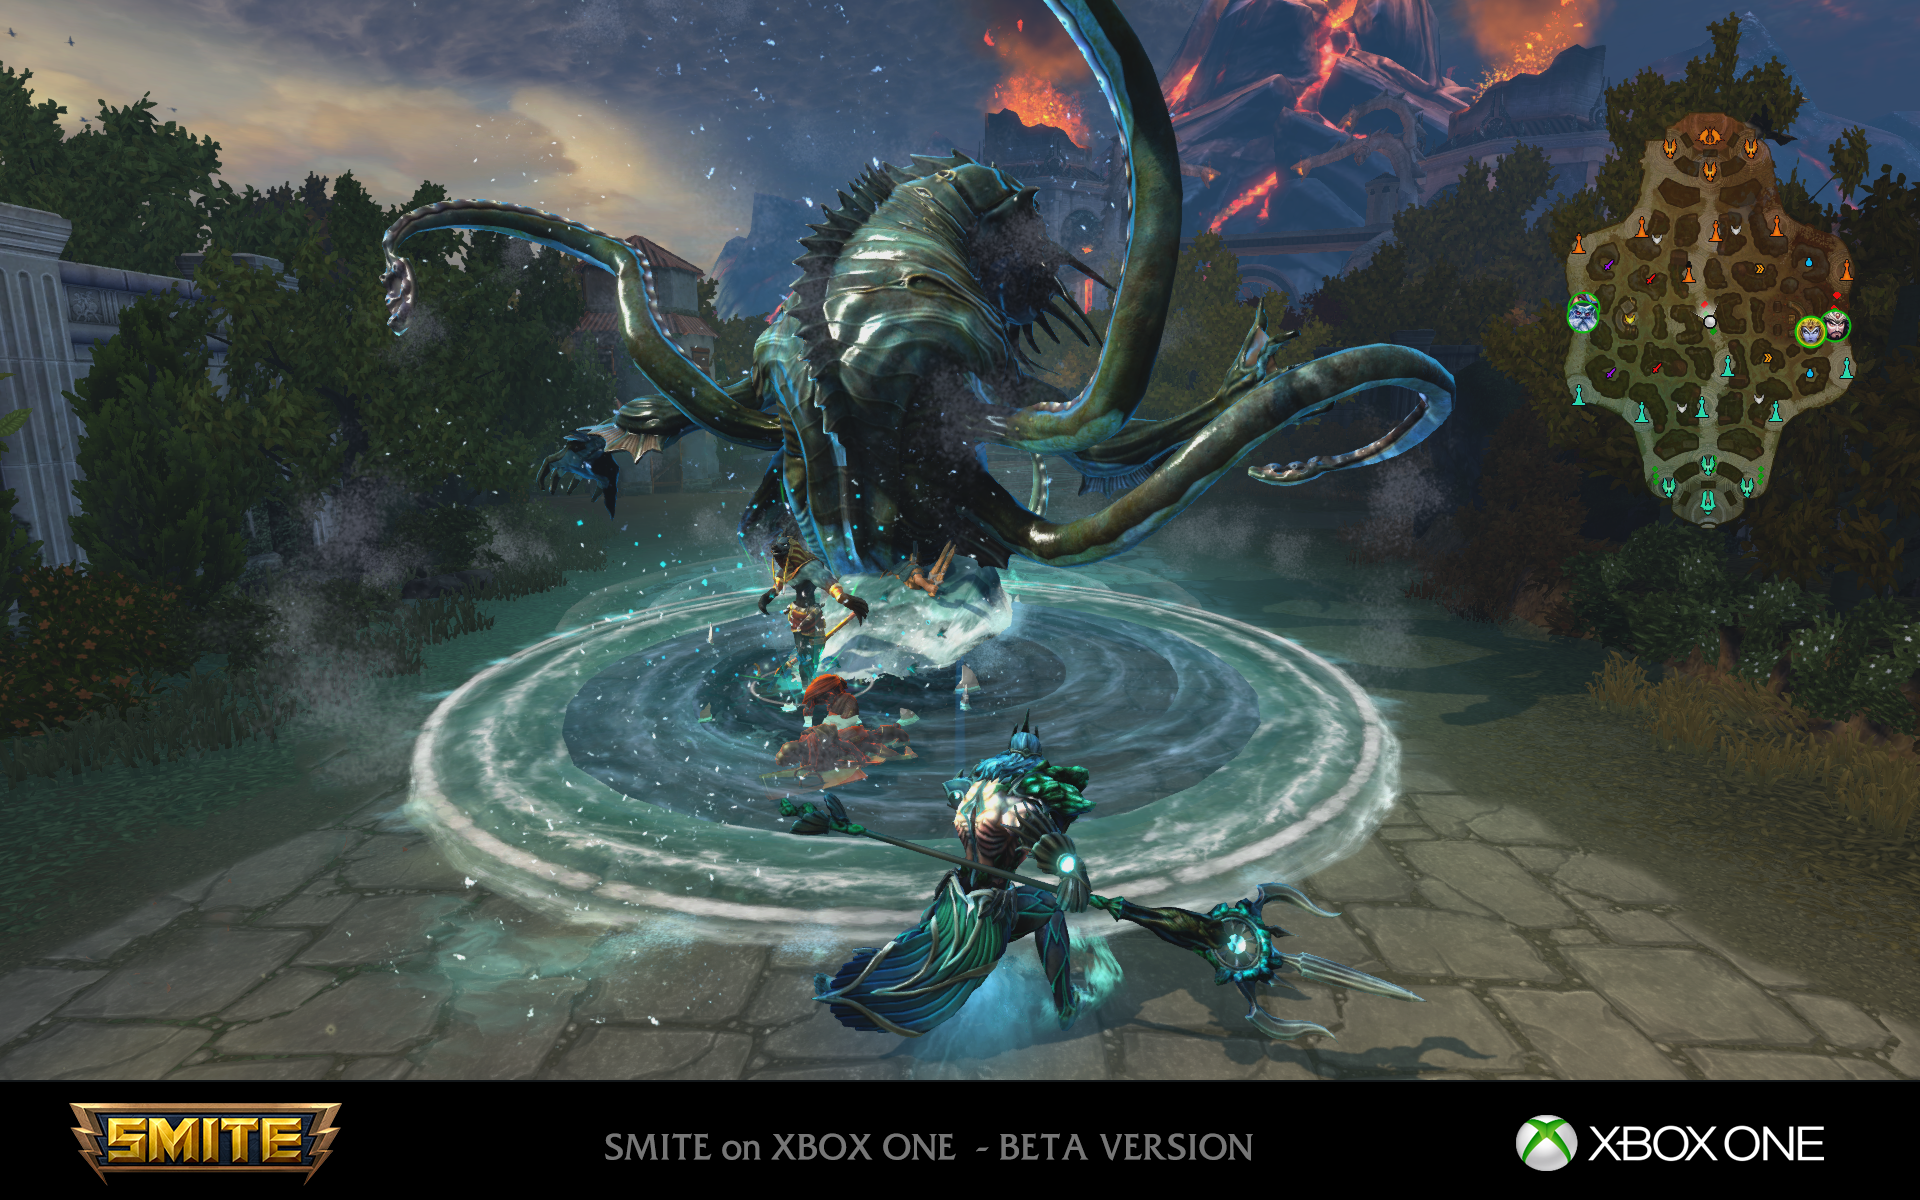 Smite for Xbox is coming to MLG